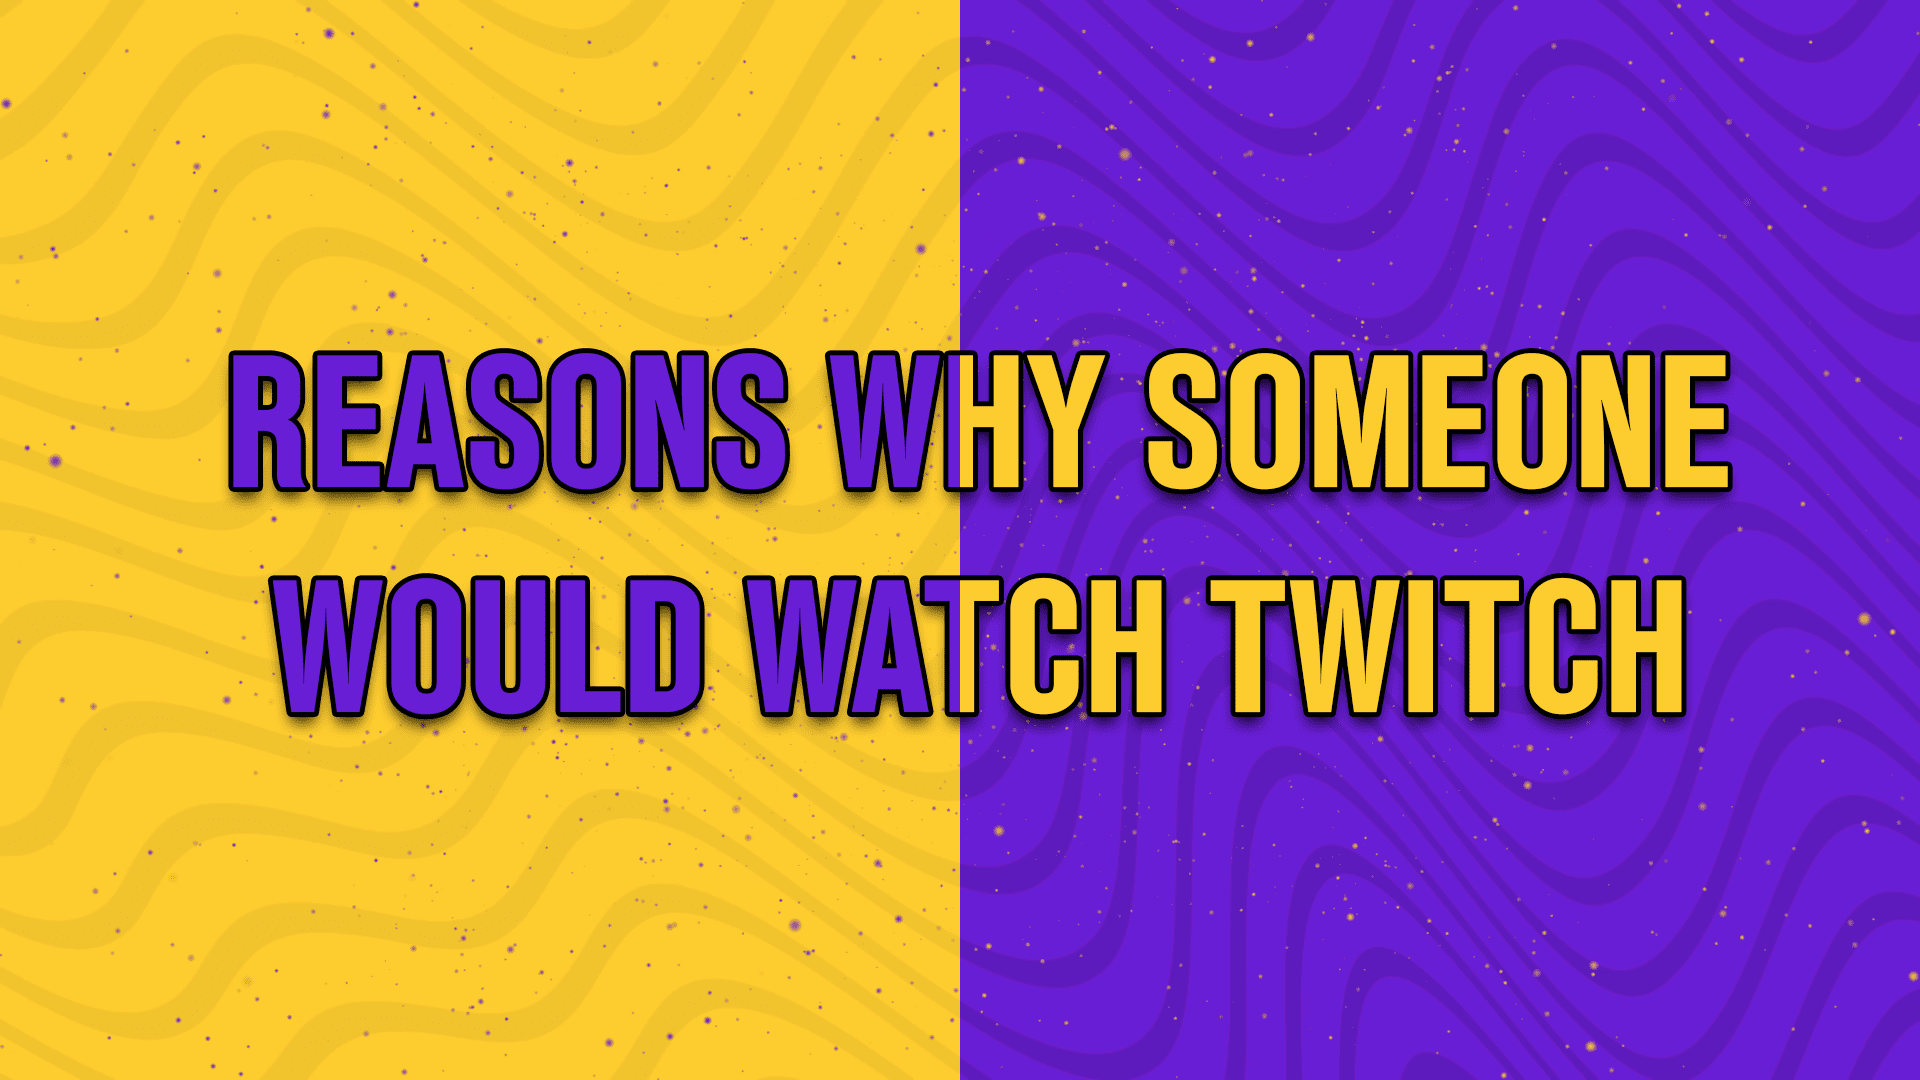 Reasons why someone would watch twitch - StreamBee